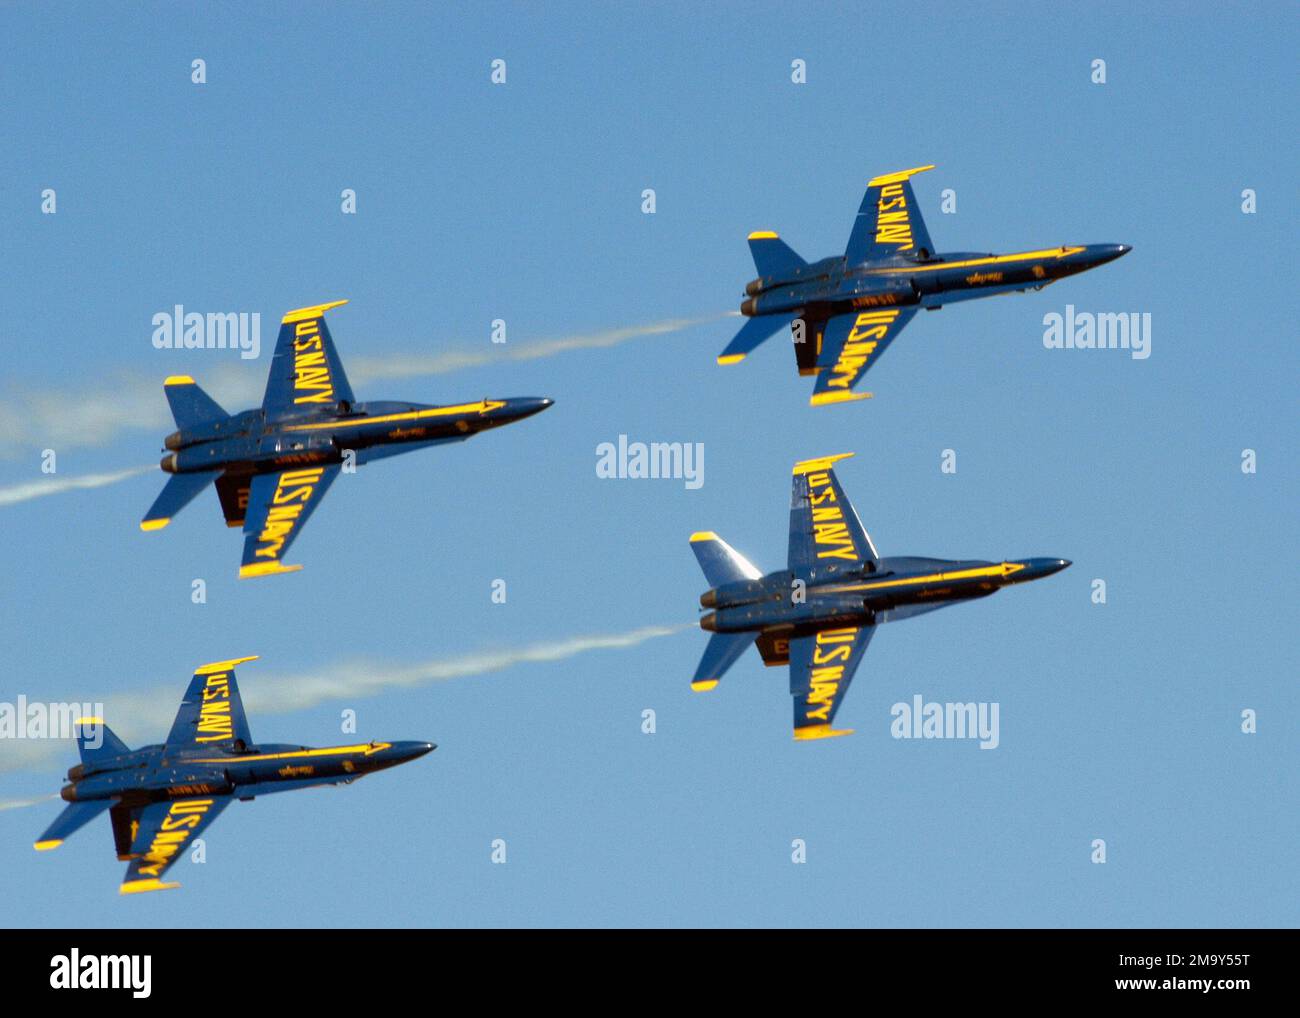 Us Navy Blue Angels Preforming Precision Aerial Maneuvers Stock Photo -  Download Image Now - iStock